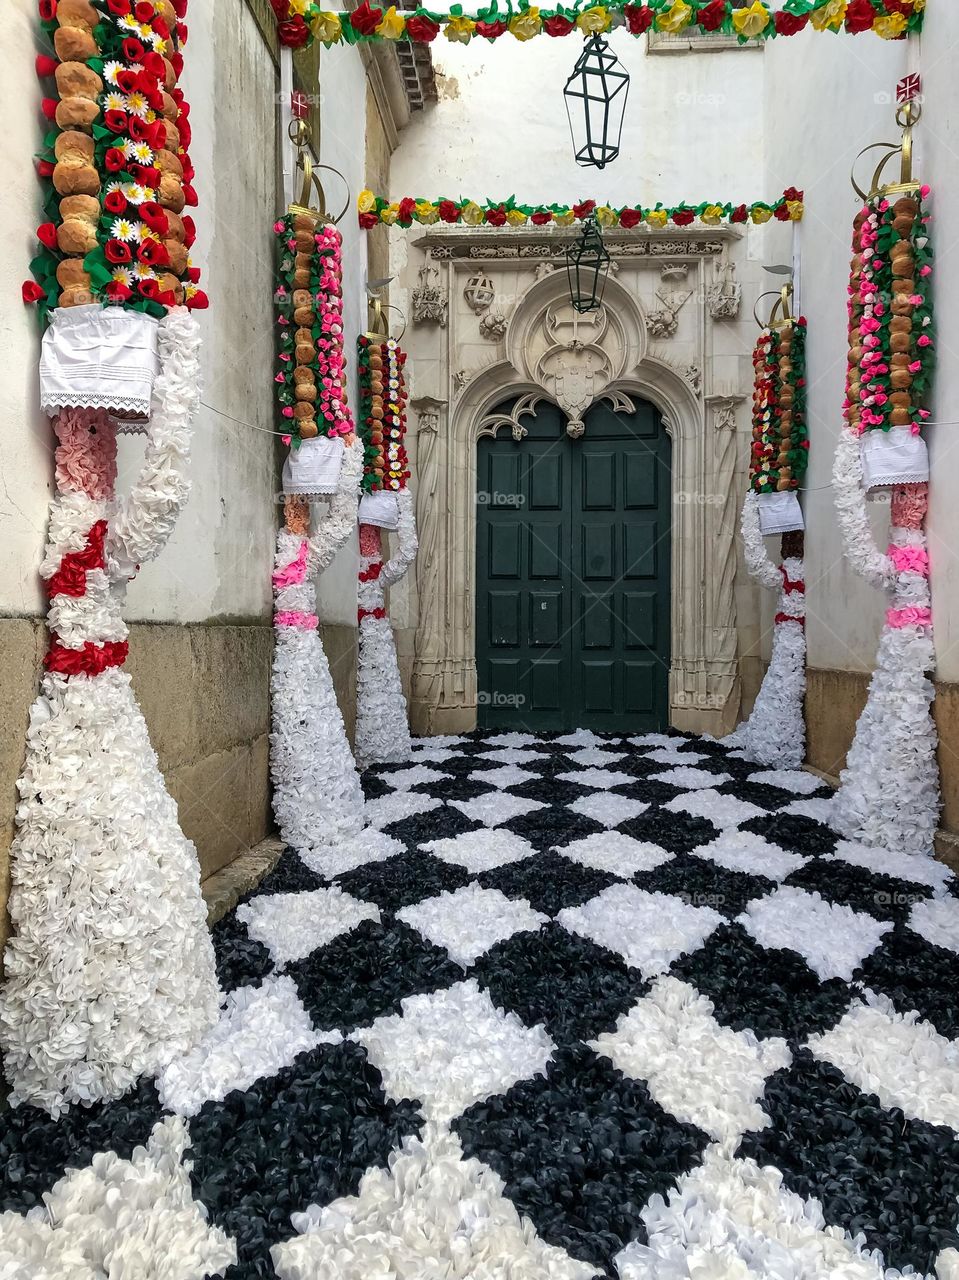 The side entrance to a church carefully decorated with paper flowers for the Festa Dos Tabuleiros in Tomar